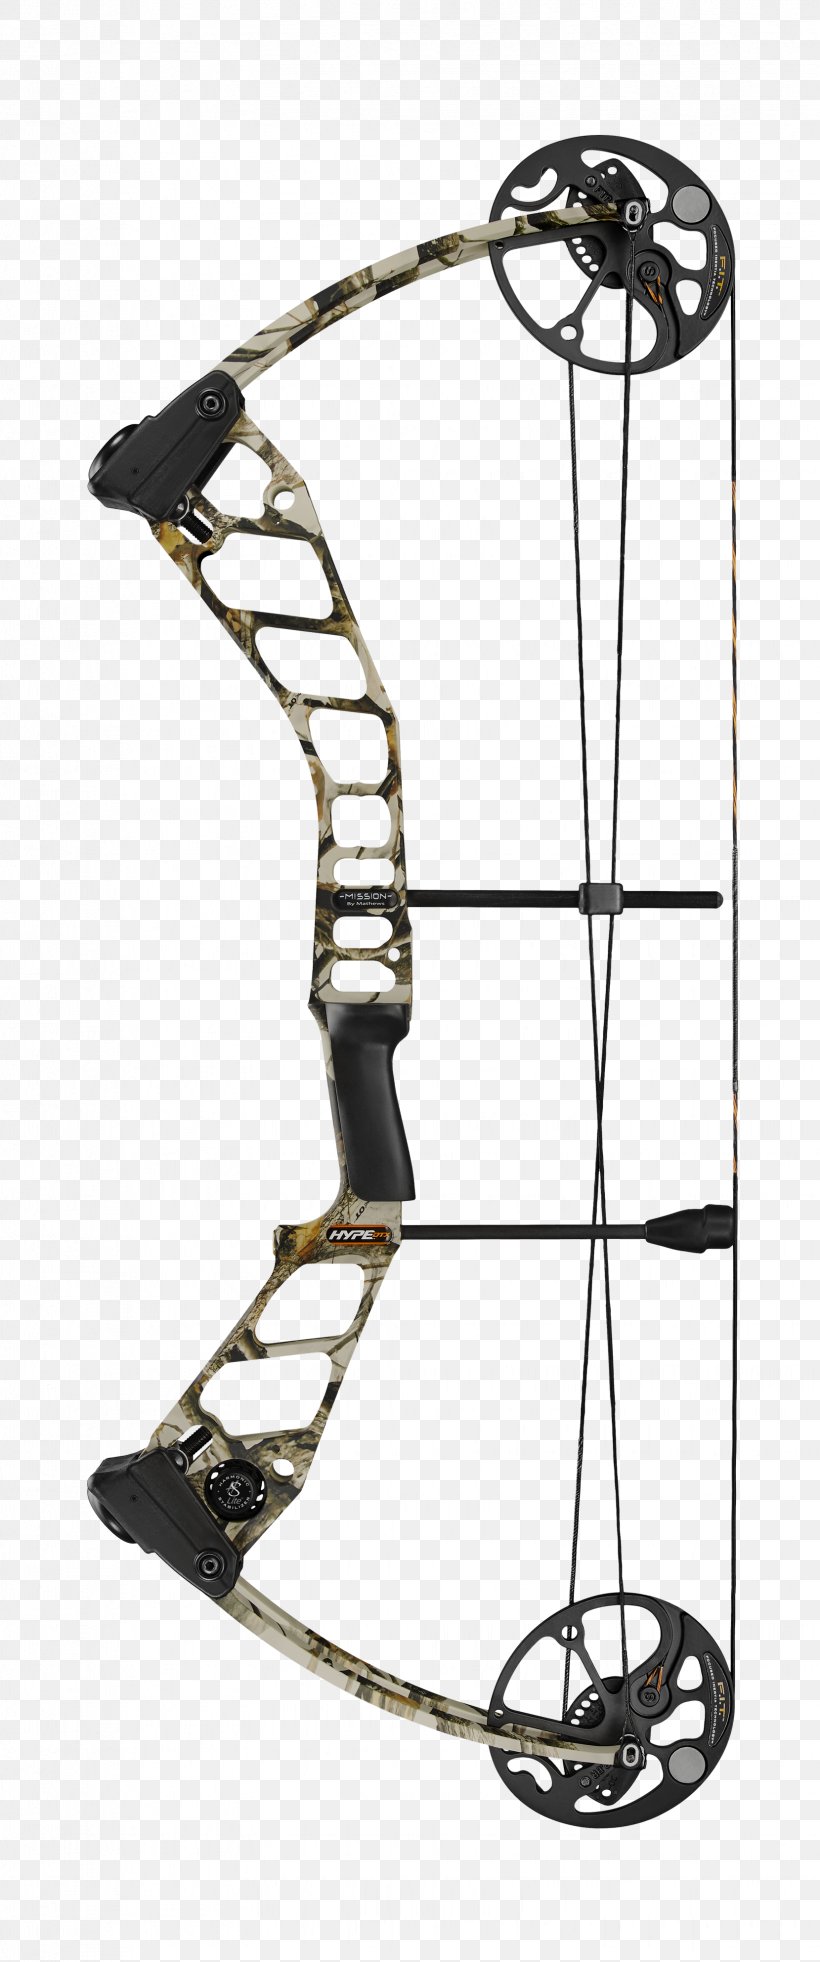 Compound Bows Archery Bow And Arrow Bowhunting, PNG, 1659x3970px, Compound Bows, Archery, Bow And Arrow, Bowhunting, Cam Download Free